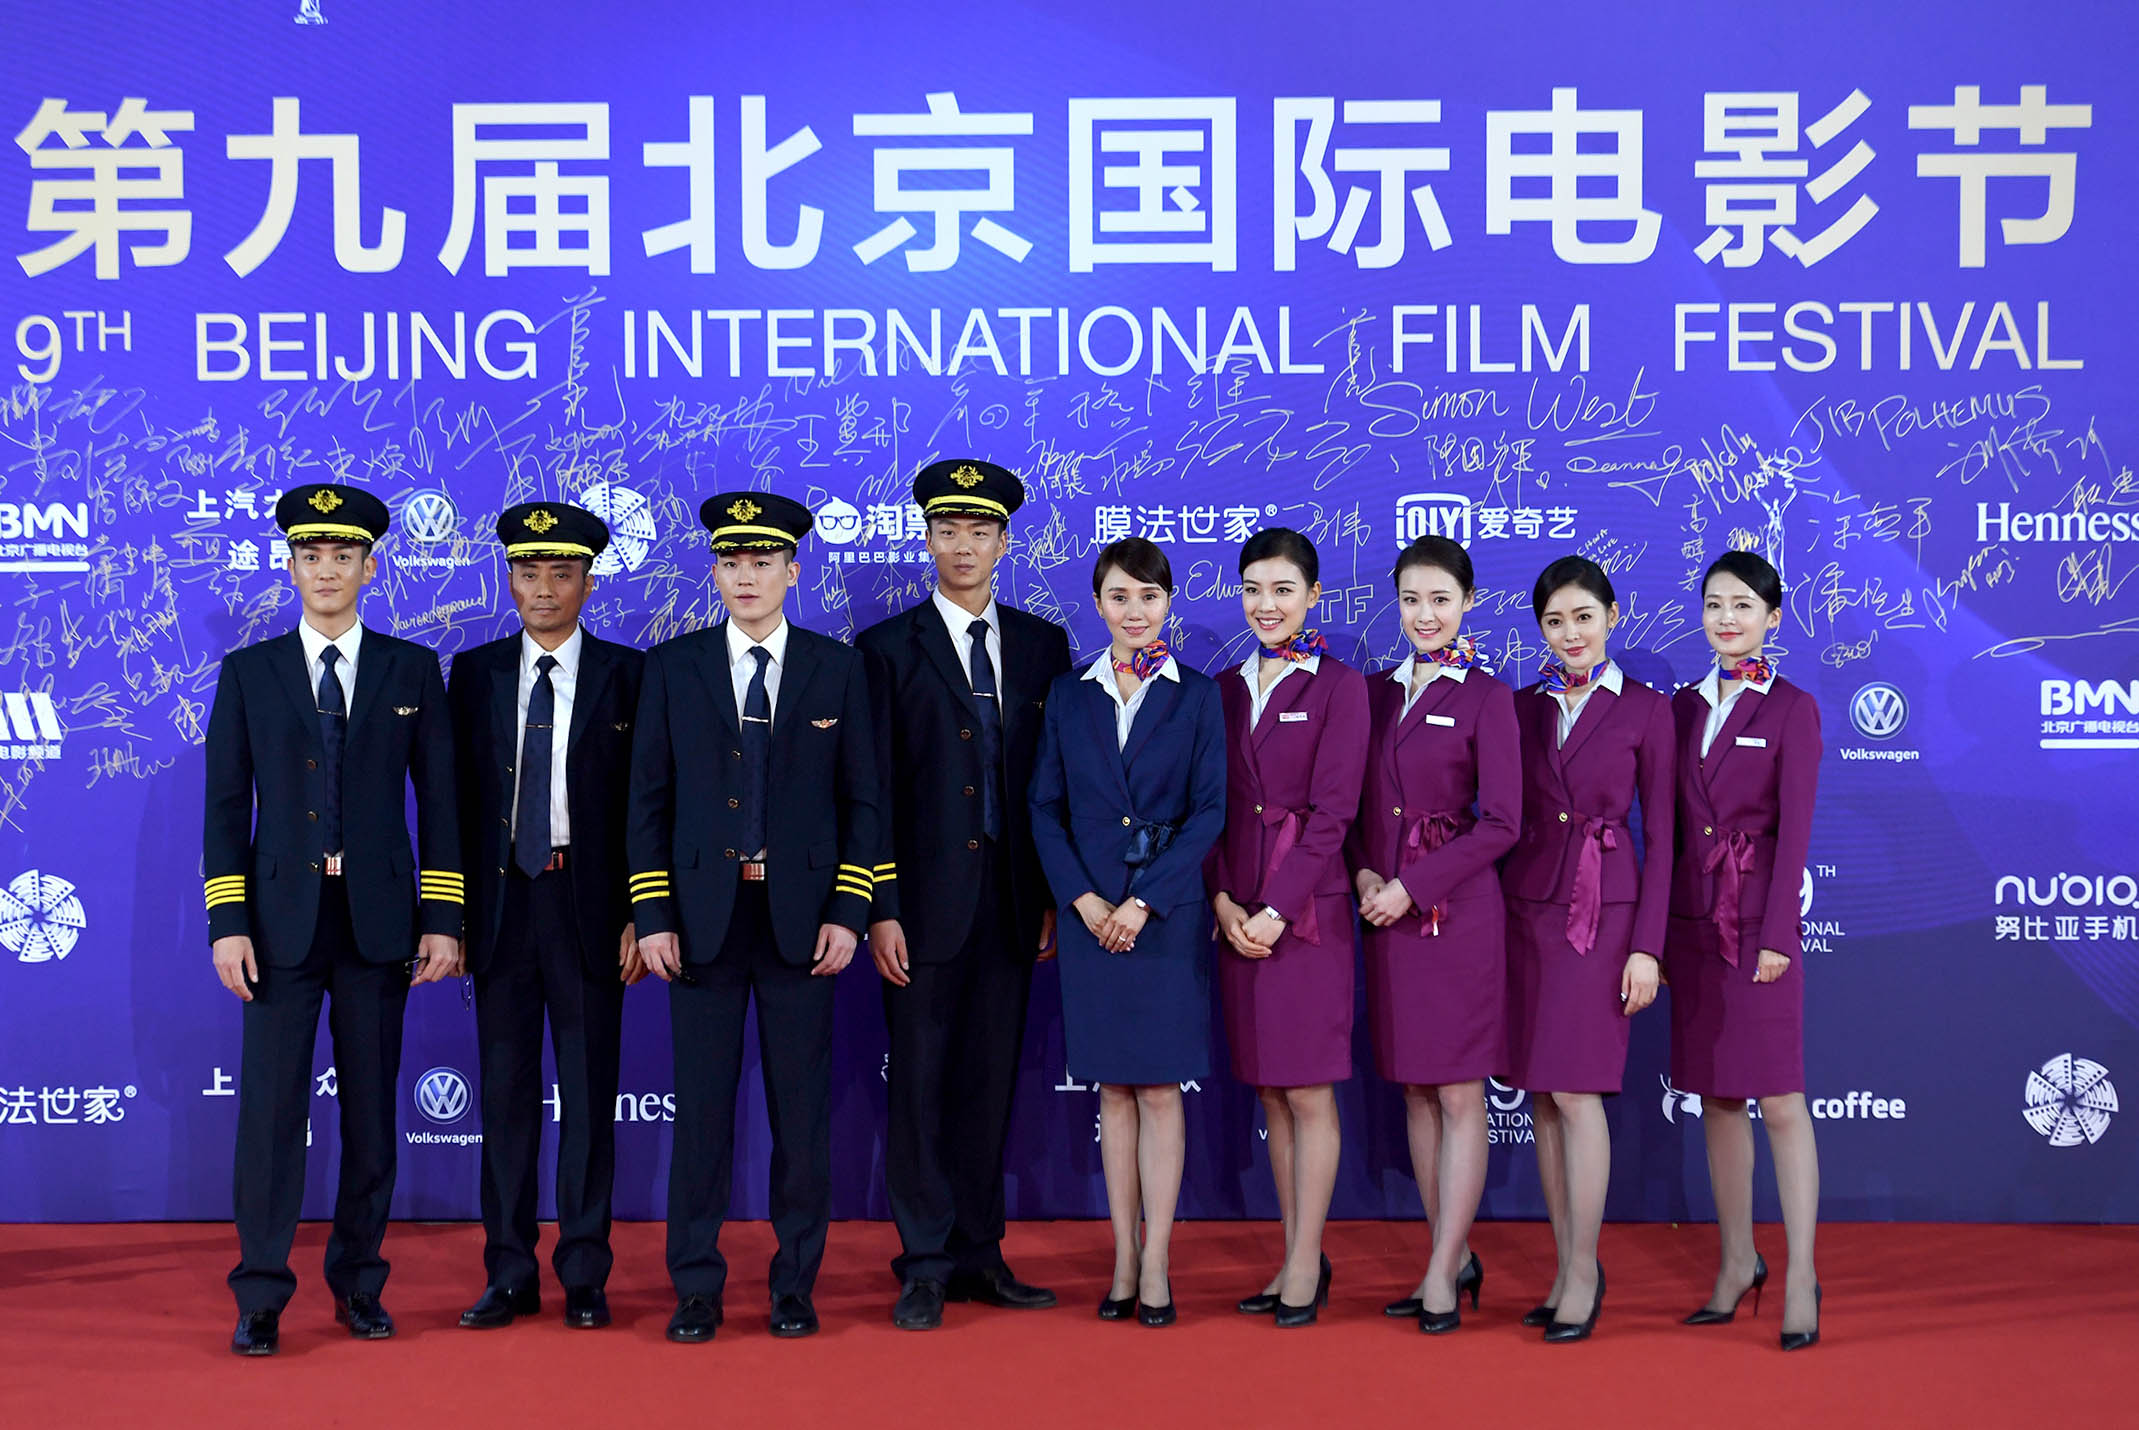 The Captain leads Chinese mainland box office - Xinhua